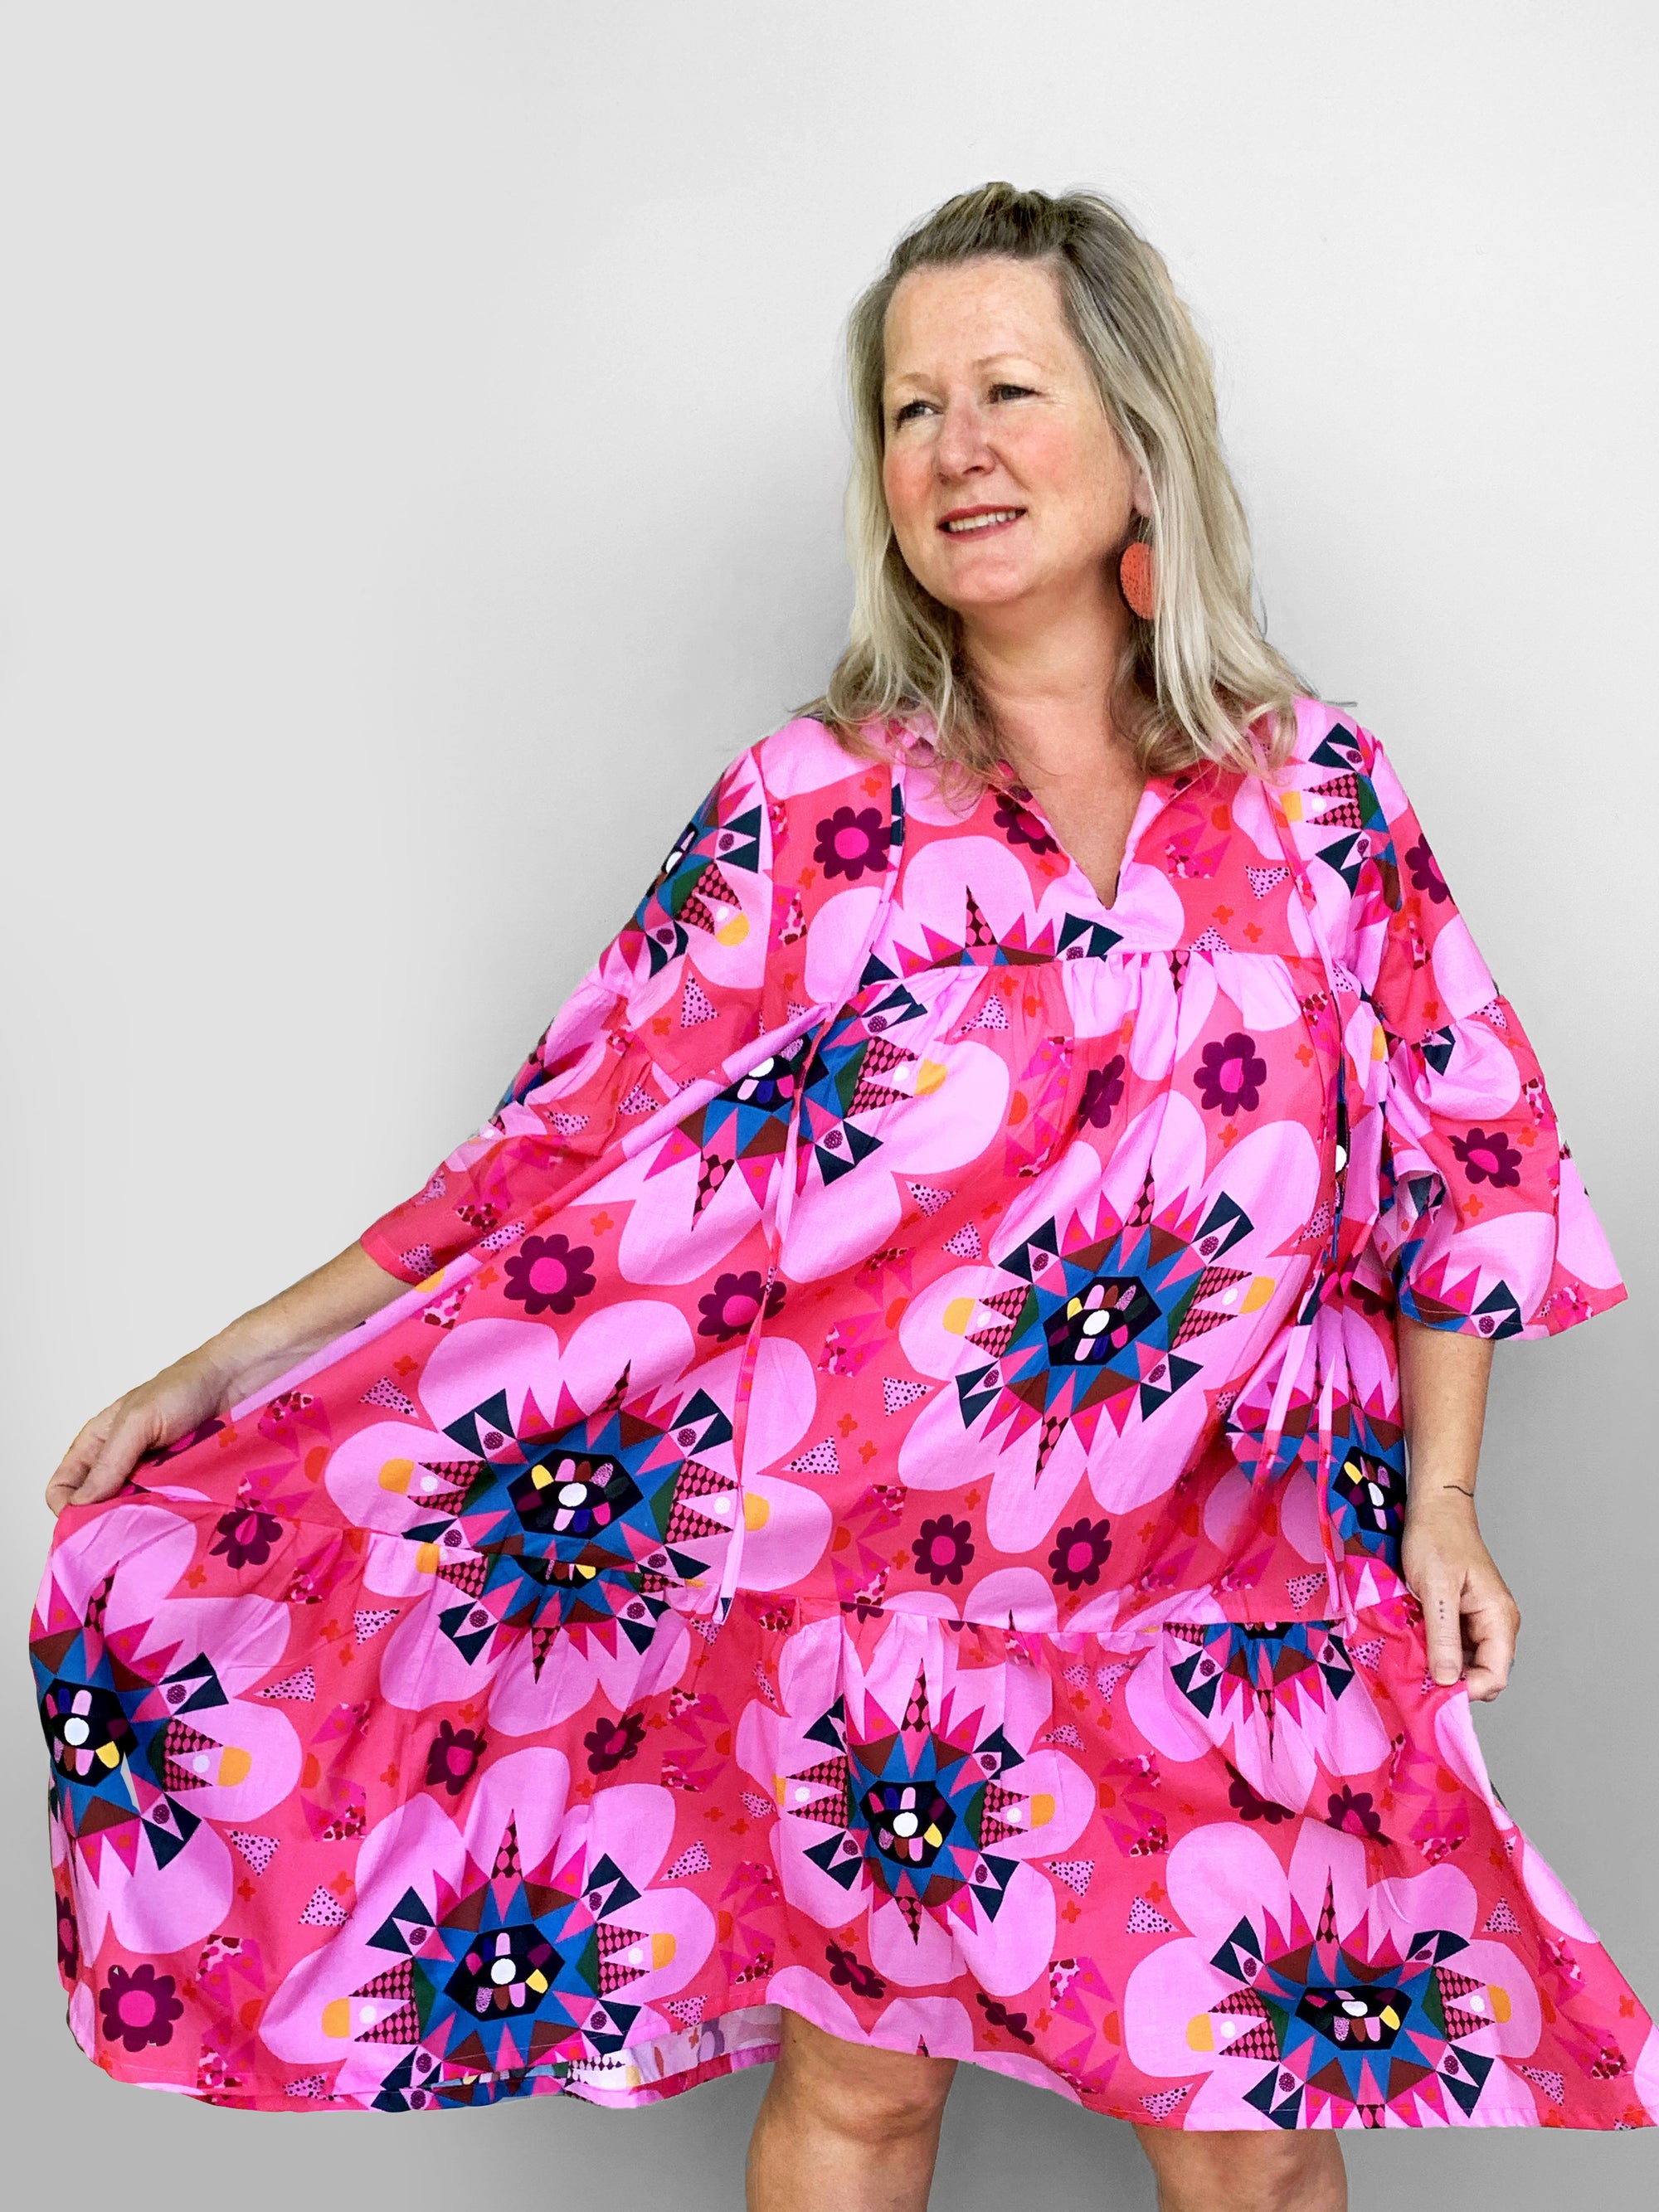 Pink Cacti pleated dress 100% lawn cotton (5909249163417)